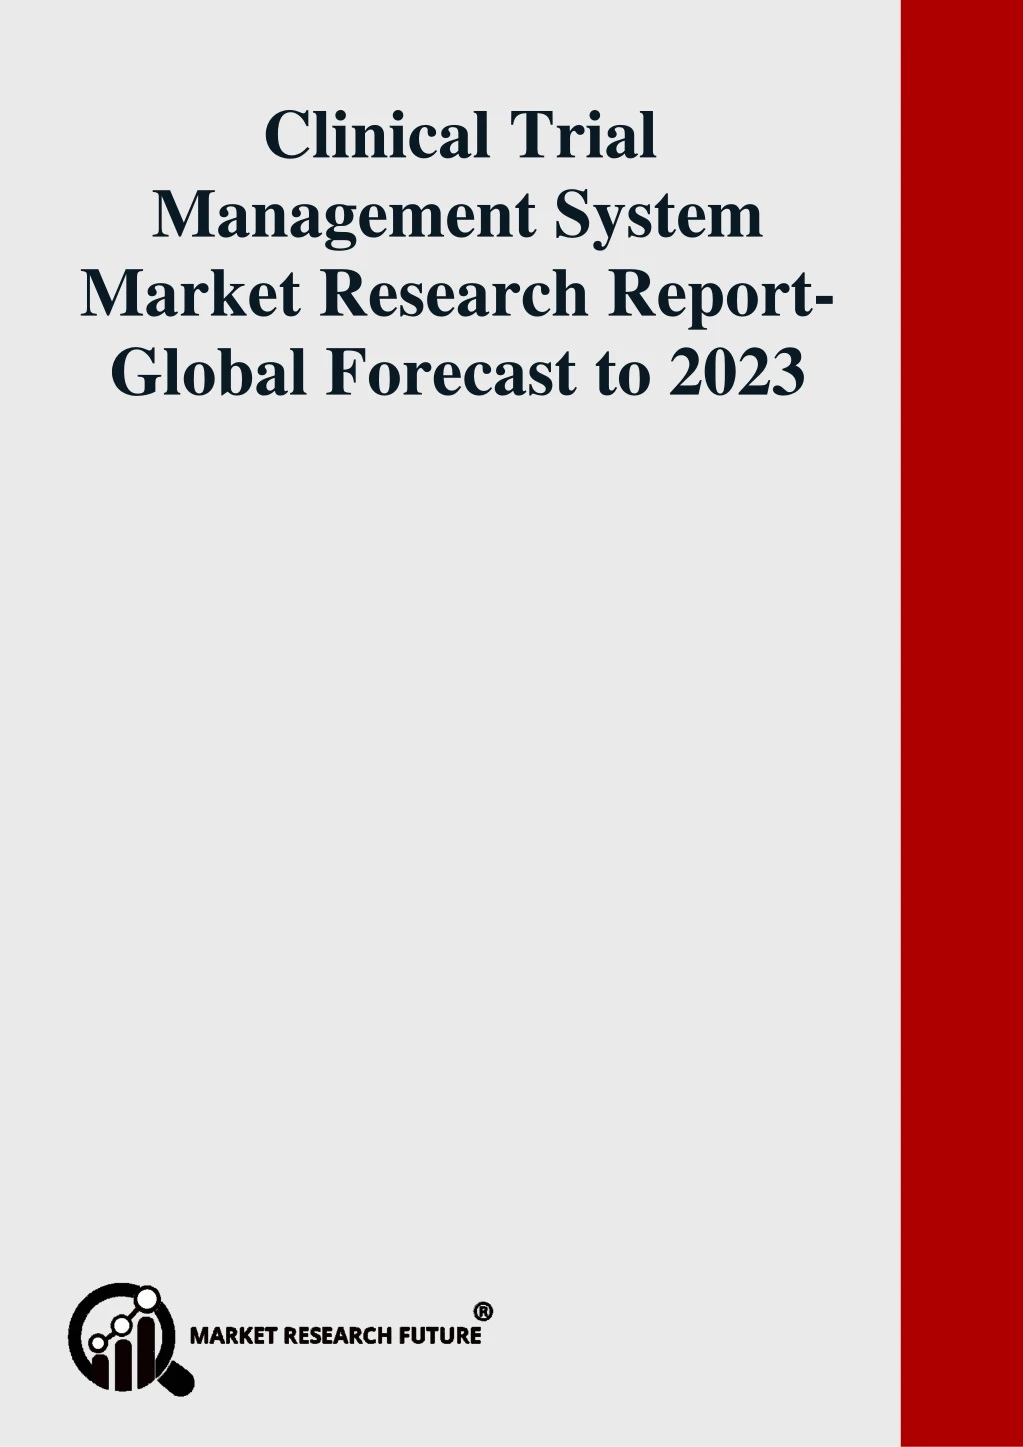 mobile money market research report forecast 2023